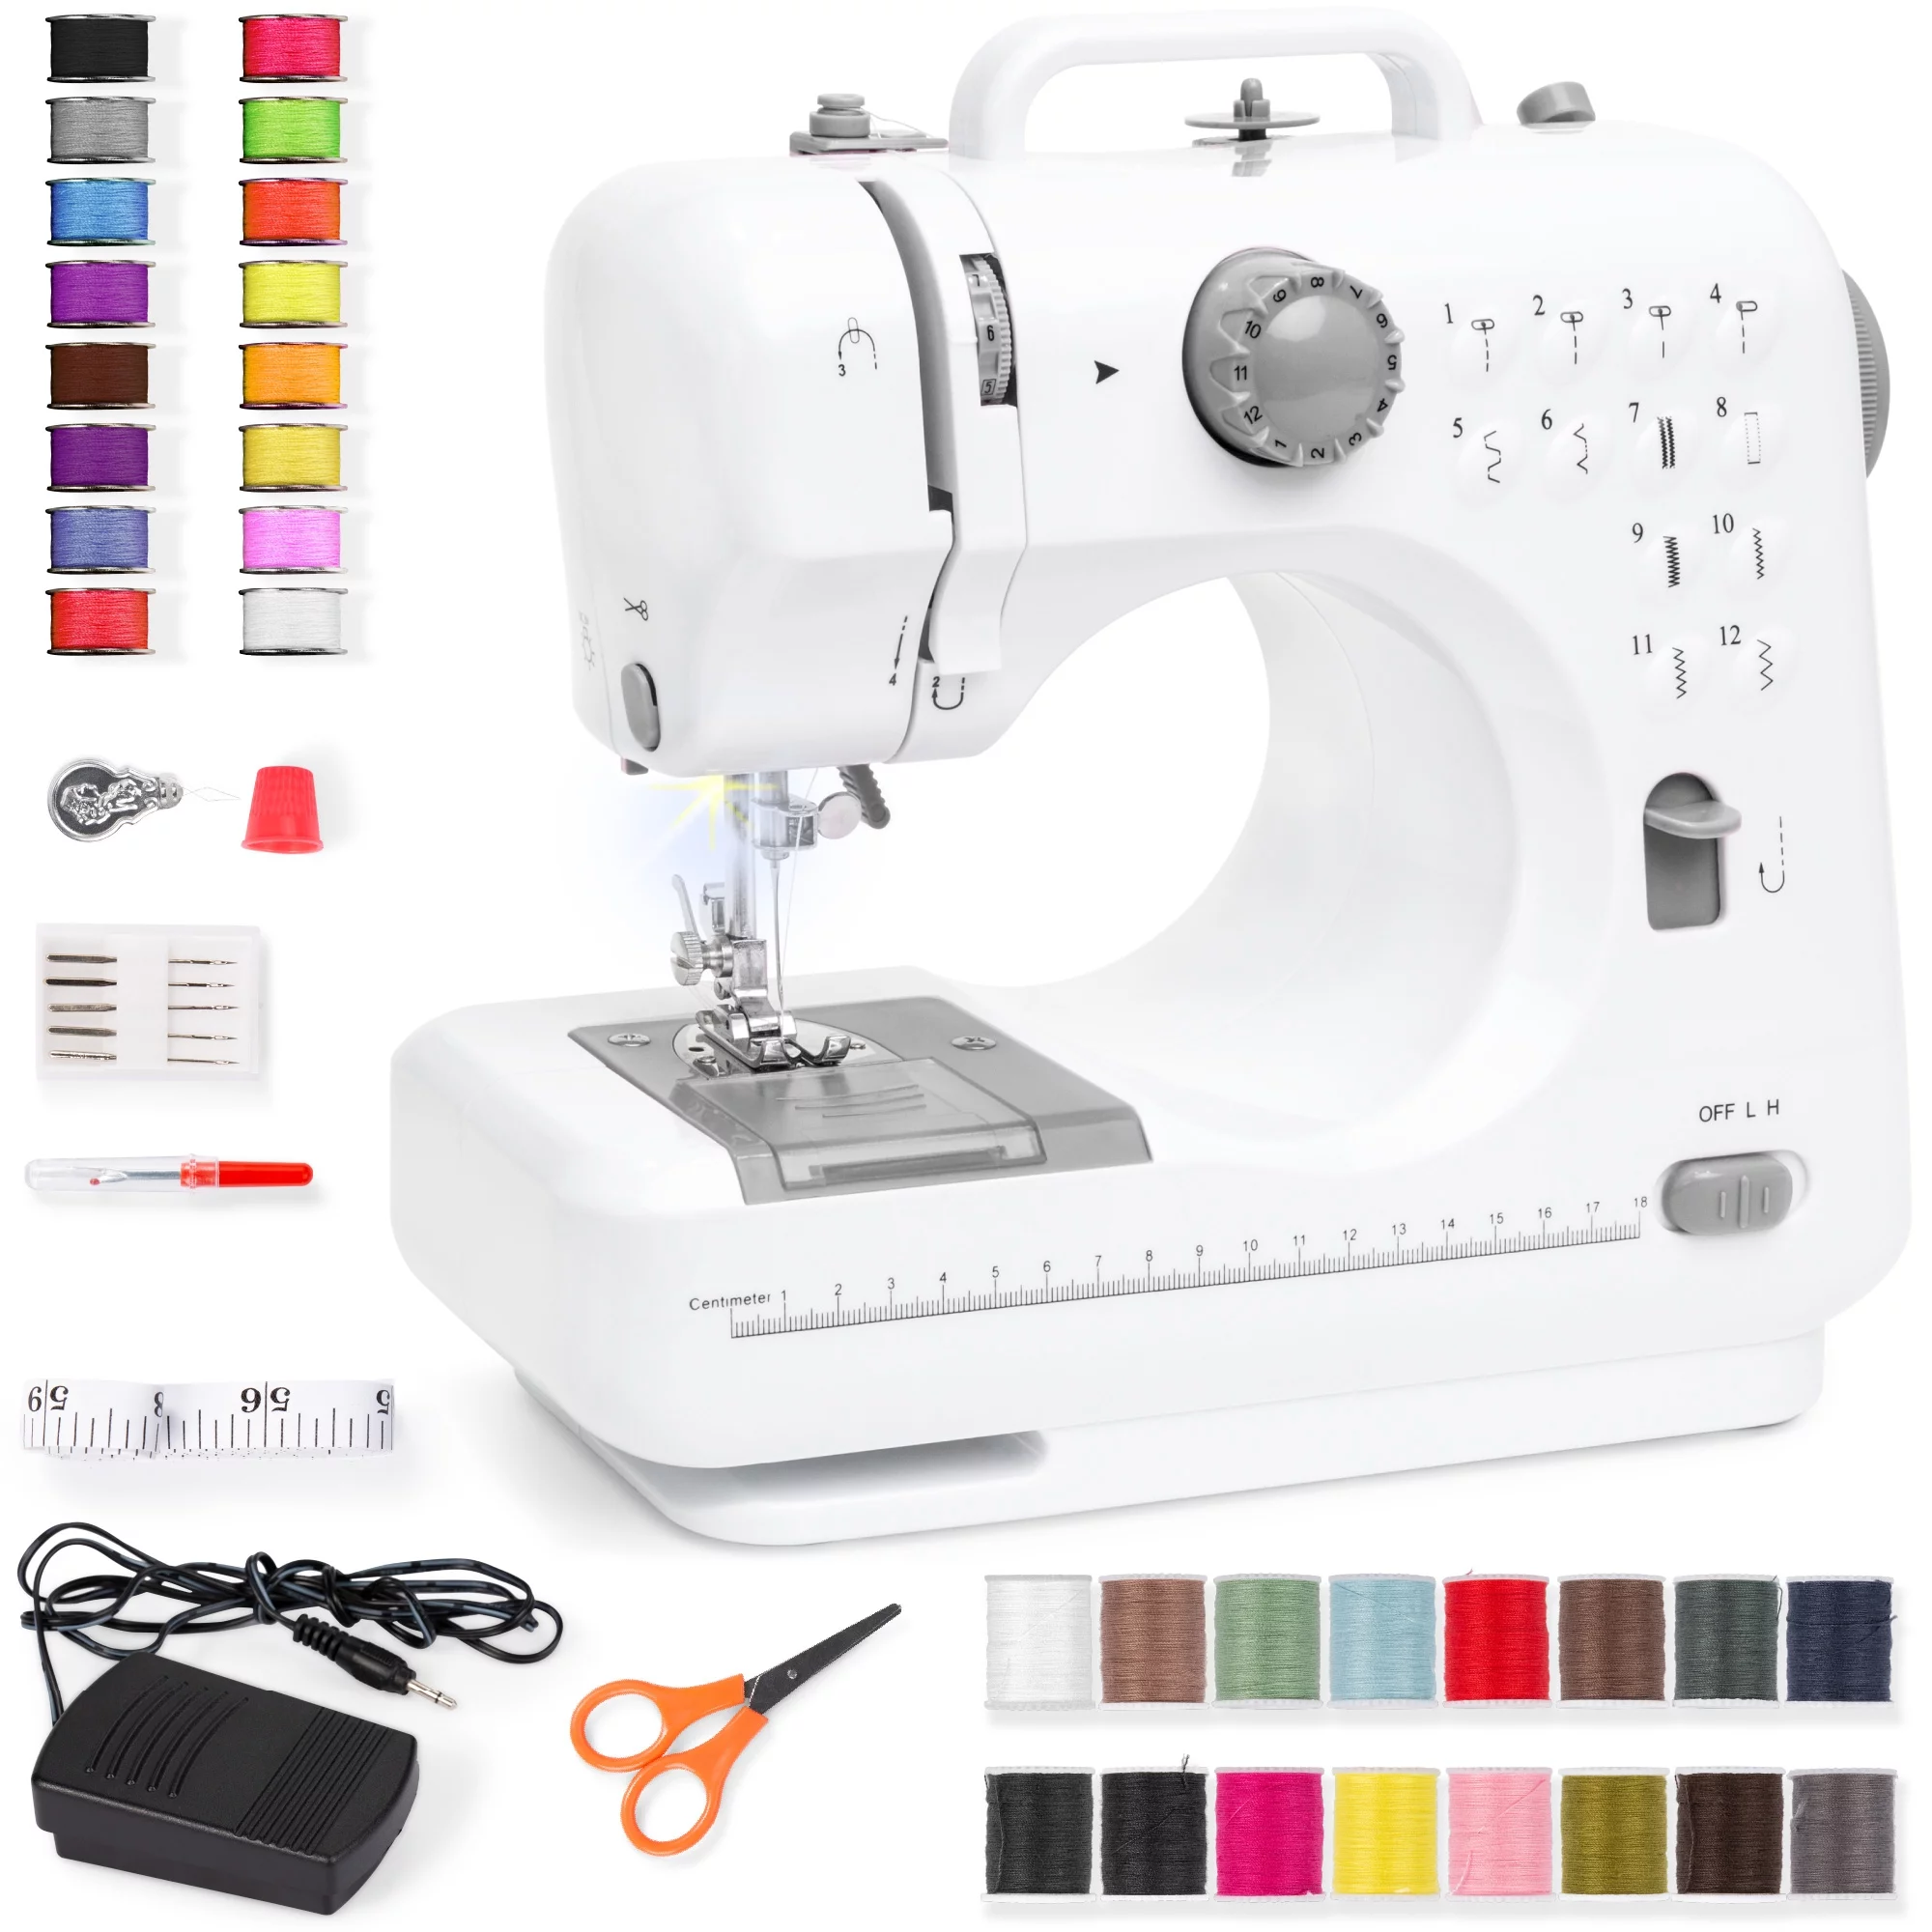 Best Choice Products 6V Portable Sewing Machine, 42-Piece Beginners Kit w/ 12 Stitch Patterns - Gray/White